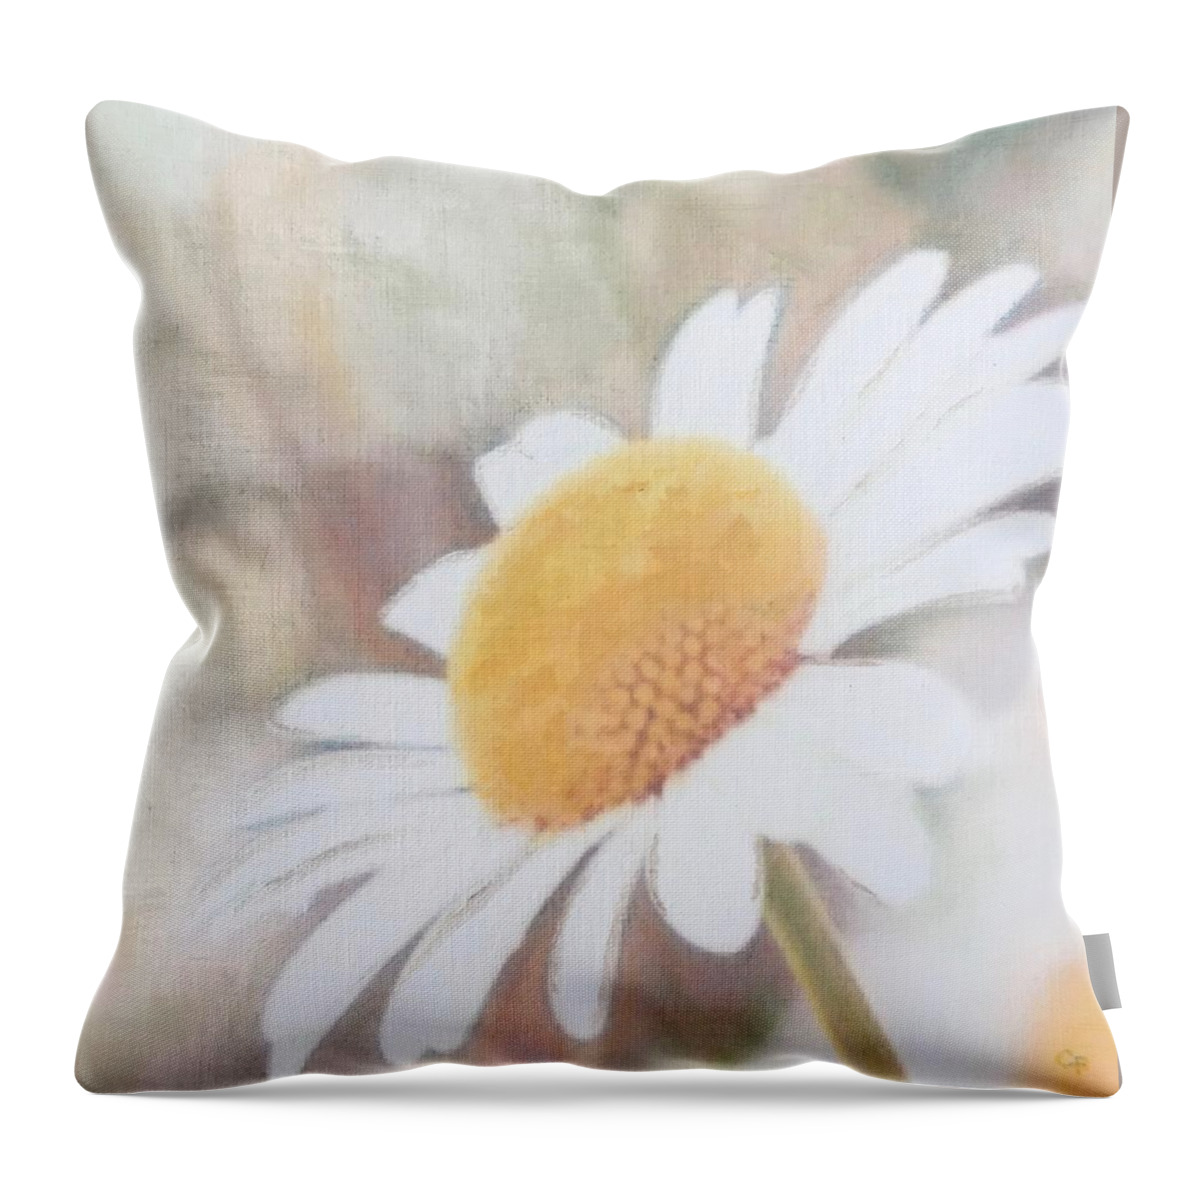 Daisies Throw Pillow featuring the painting Happy by Cara Frafjord